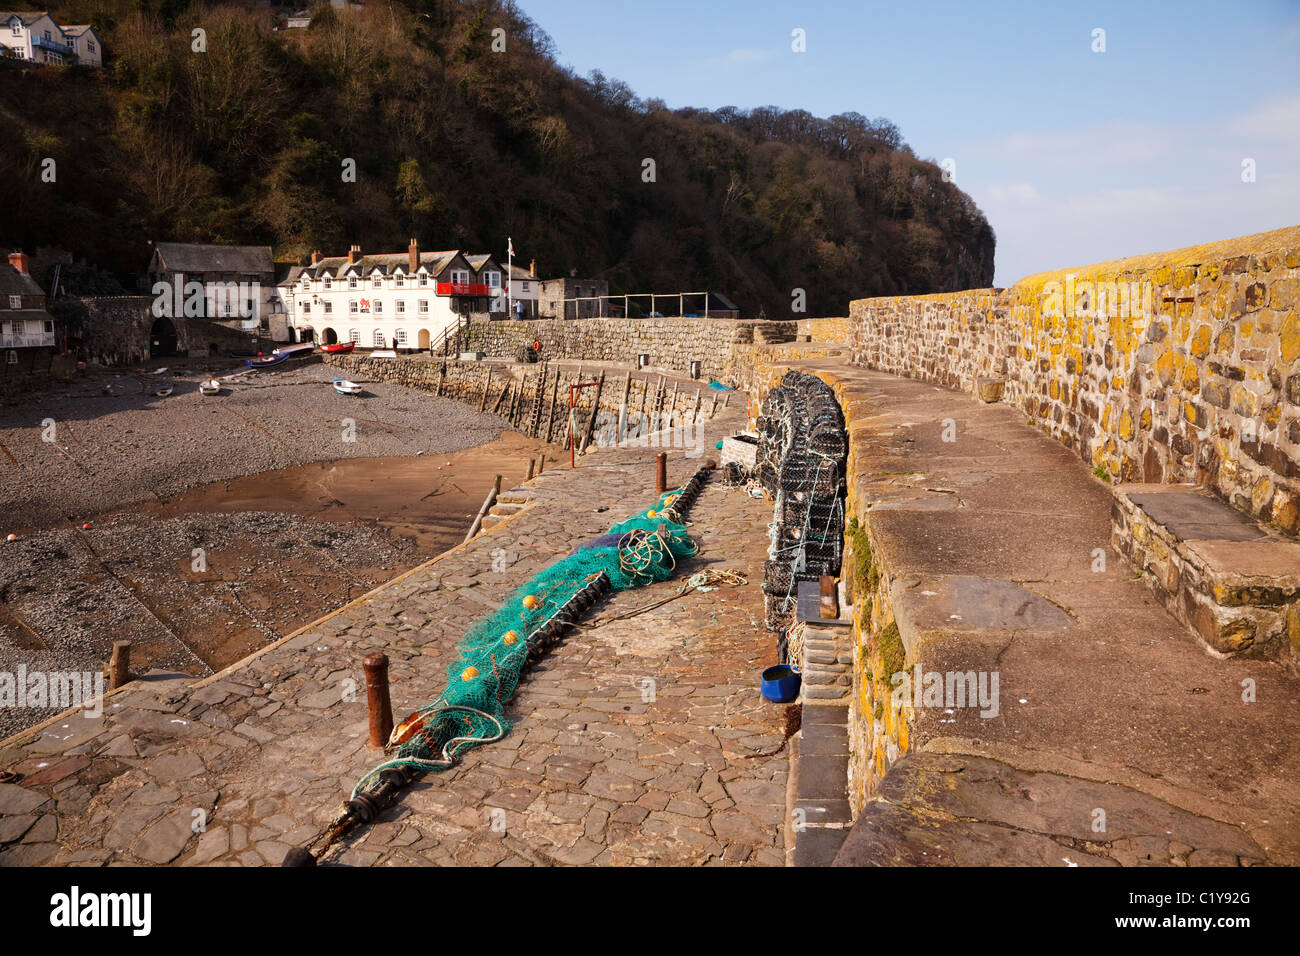 Quay at Clovelly, Devon, leading to the Red Lion Hotel. Stock Photo